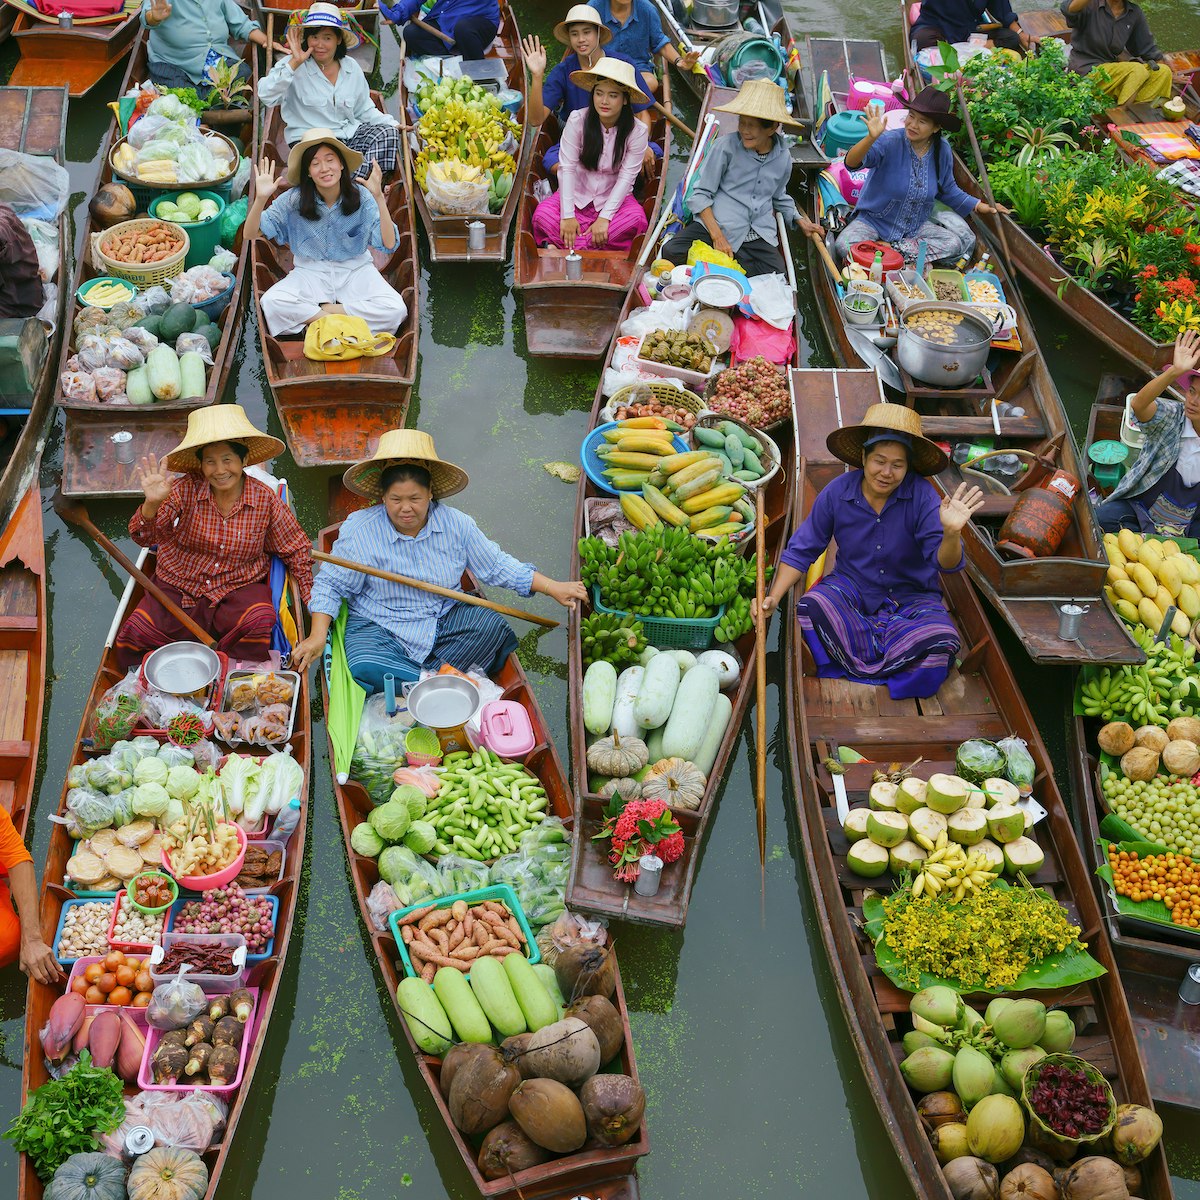 Crowded wooden boats in canal with fruits, vegetables, foods and grocery products for sell and trade by villagers at Tha Kha traditional floating market.